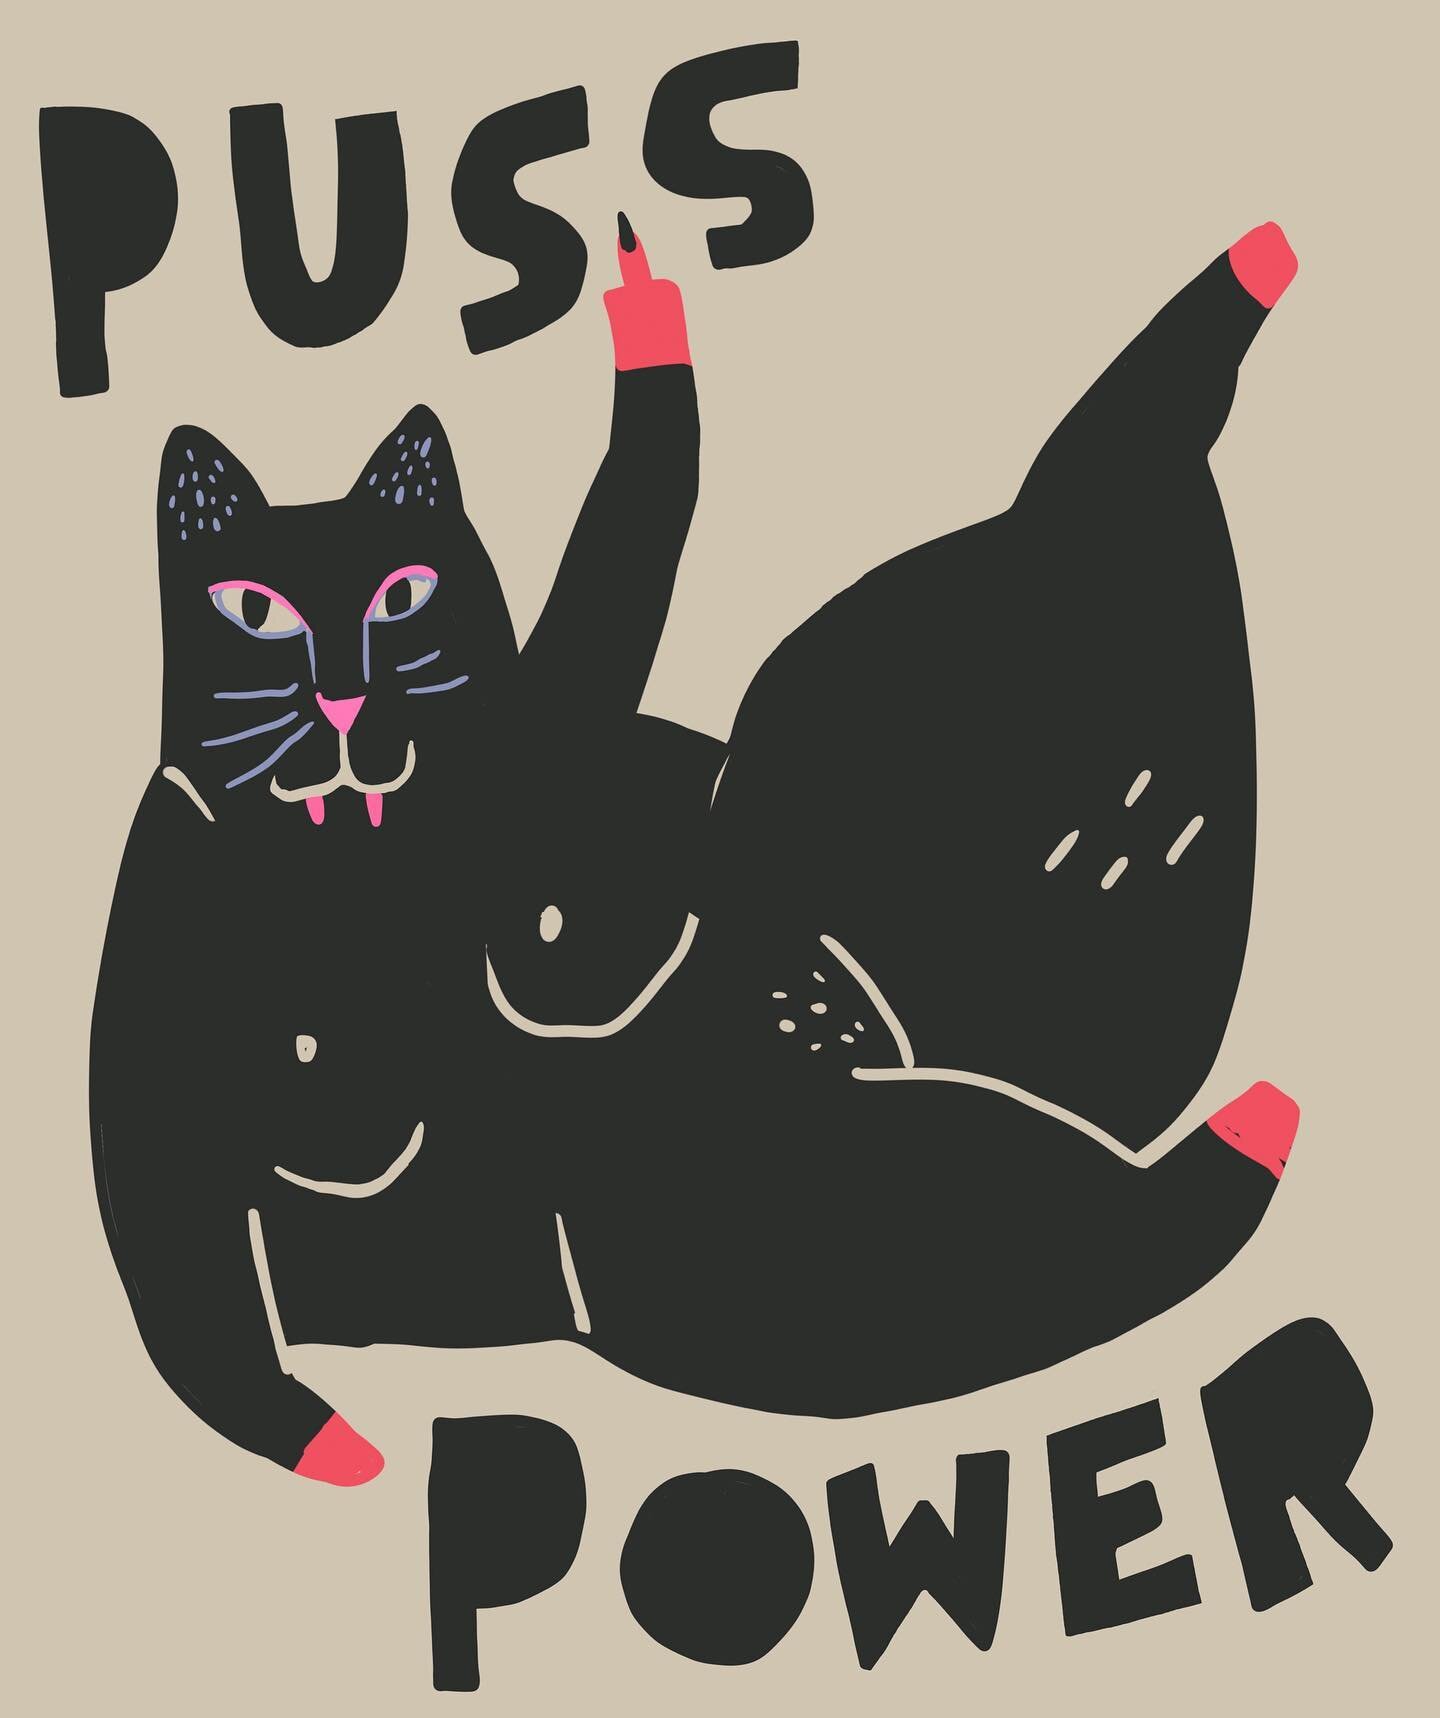 5 more days guys! It&rsquo;s too late to vote by mail (in most states) but find a drop box or go in person. Let&rsquo;s get out there and stick it to the D. 
.
.
.
#pussypower #vote #womenruntheworld #girlsruntheworld #doodle #illustration #procreate